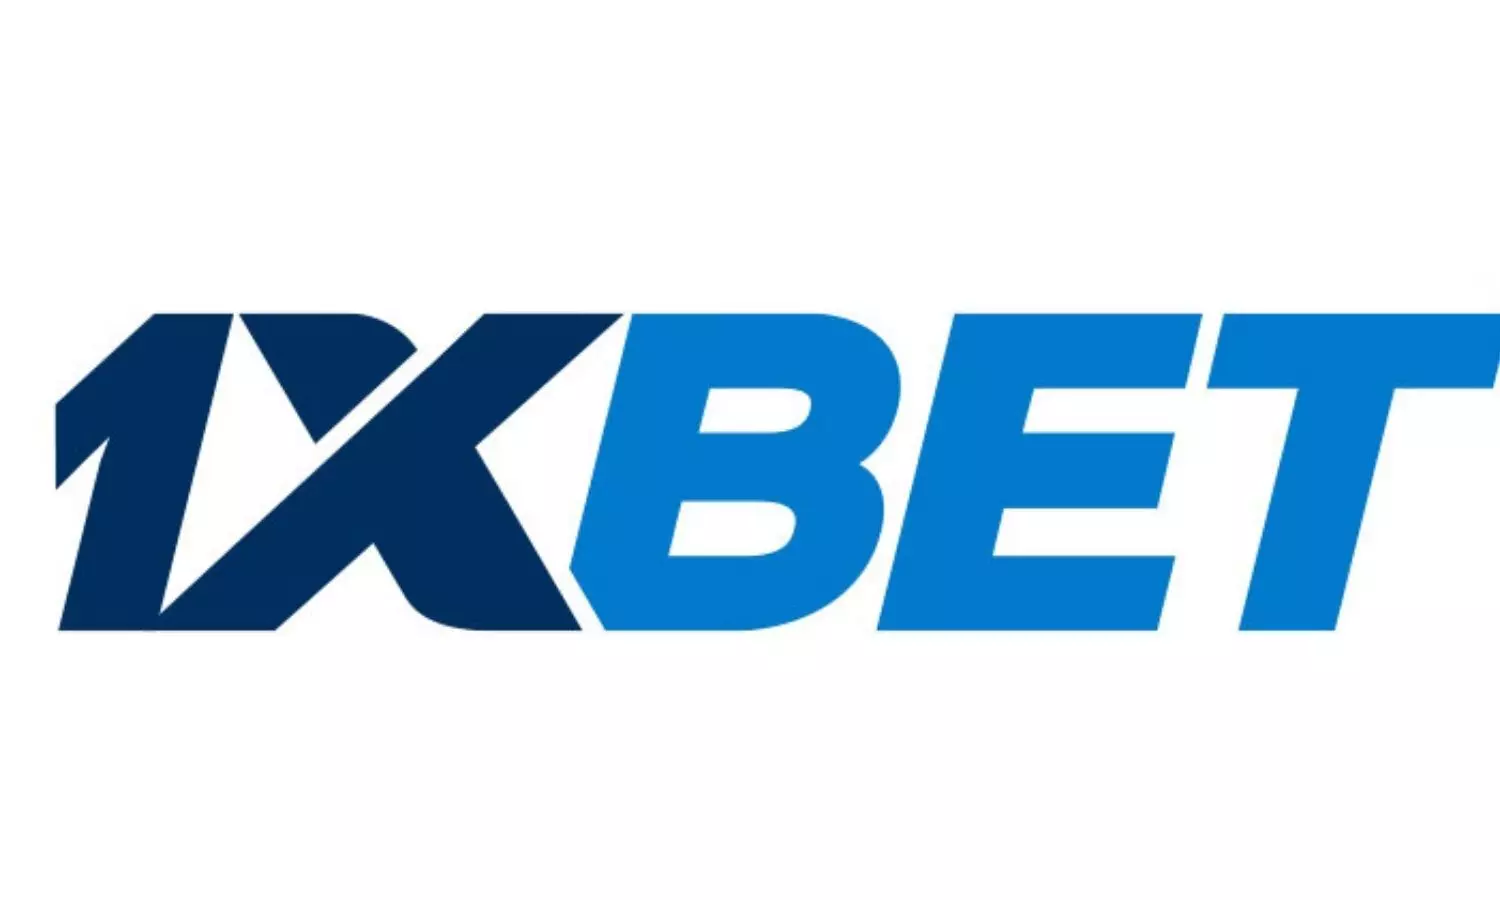 1XBet App India Review (2023)